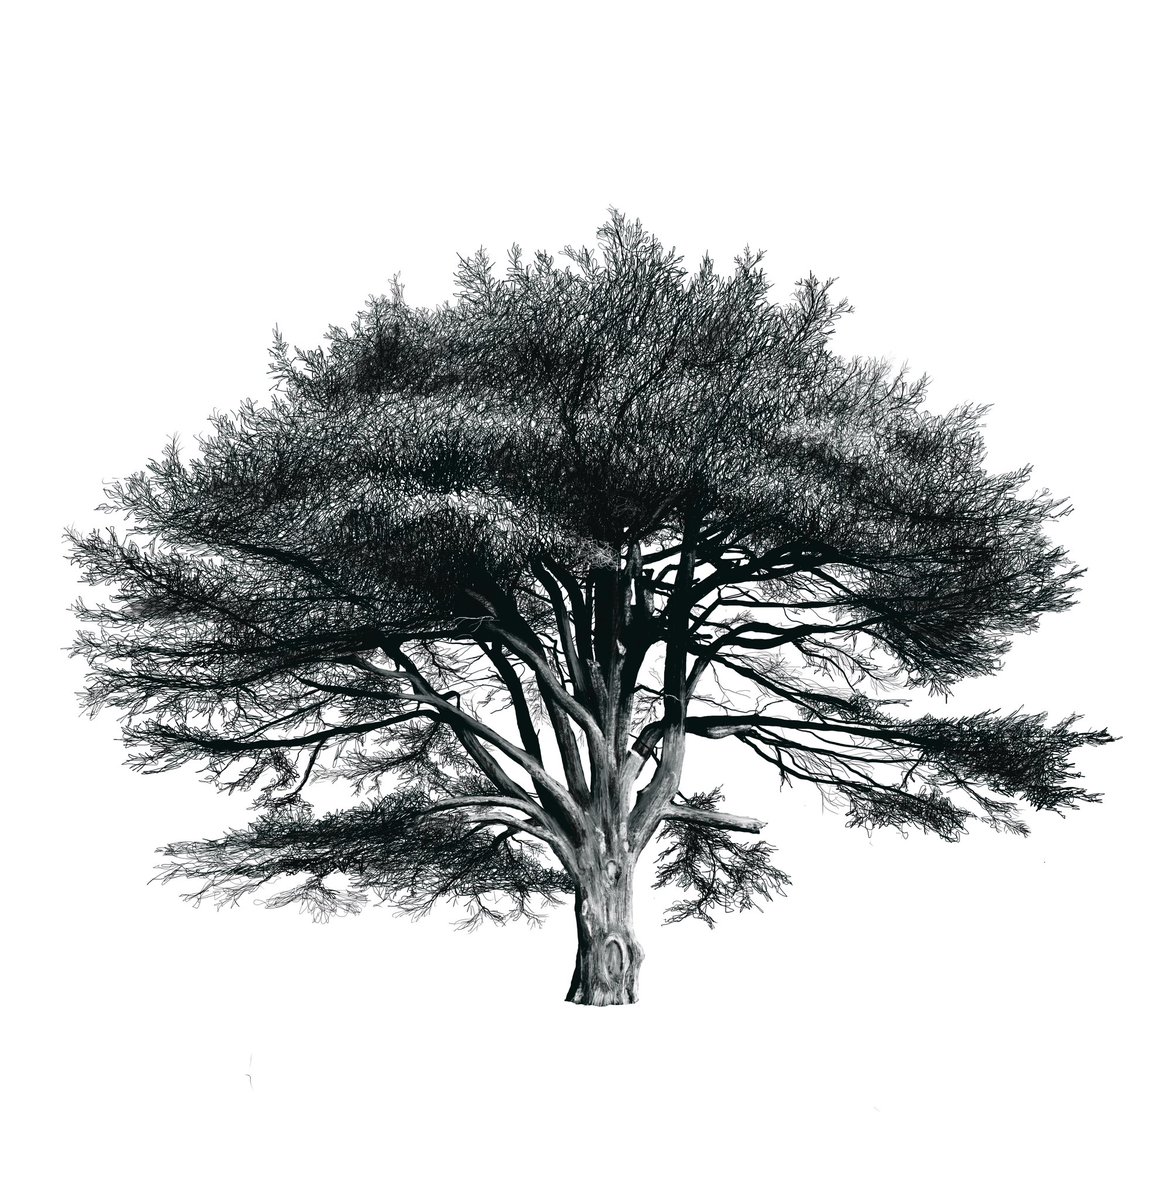 Out sketching at @YSPsculpture today. This is a veteran Cedar of Lebanon that can be found at SE 28194 12901